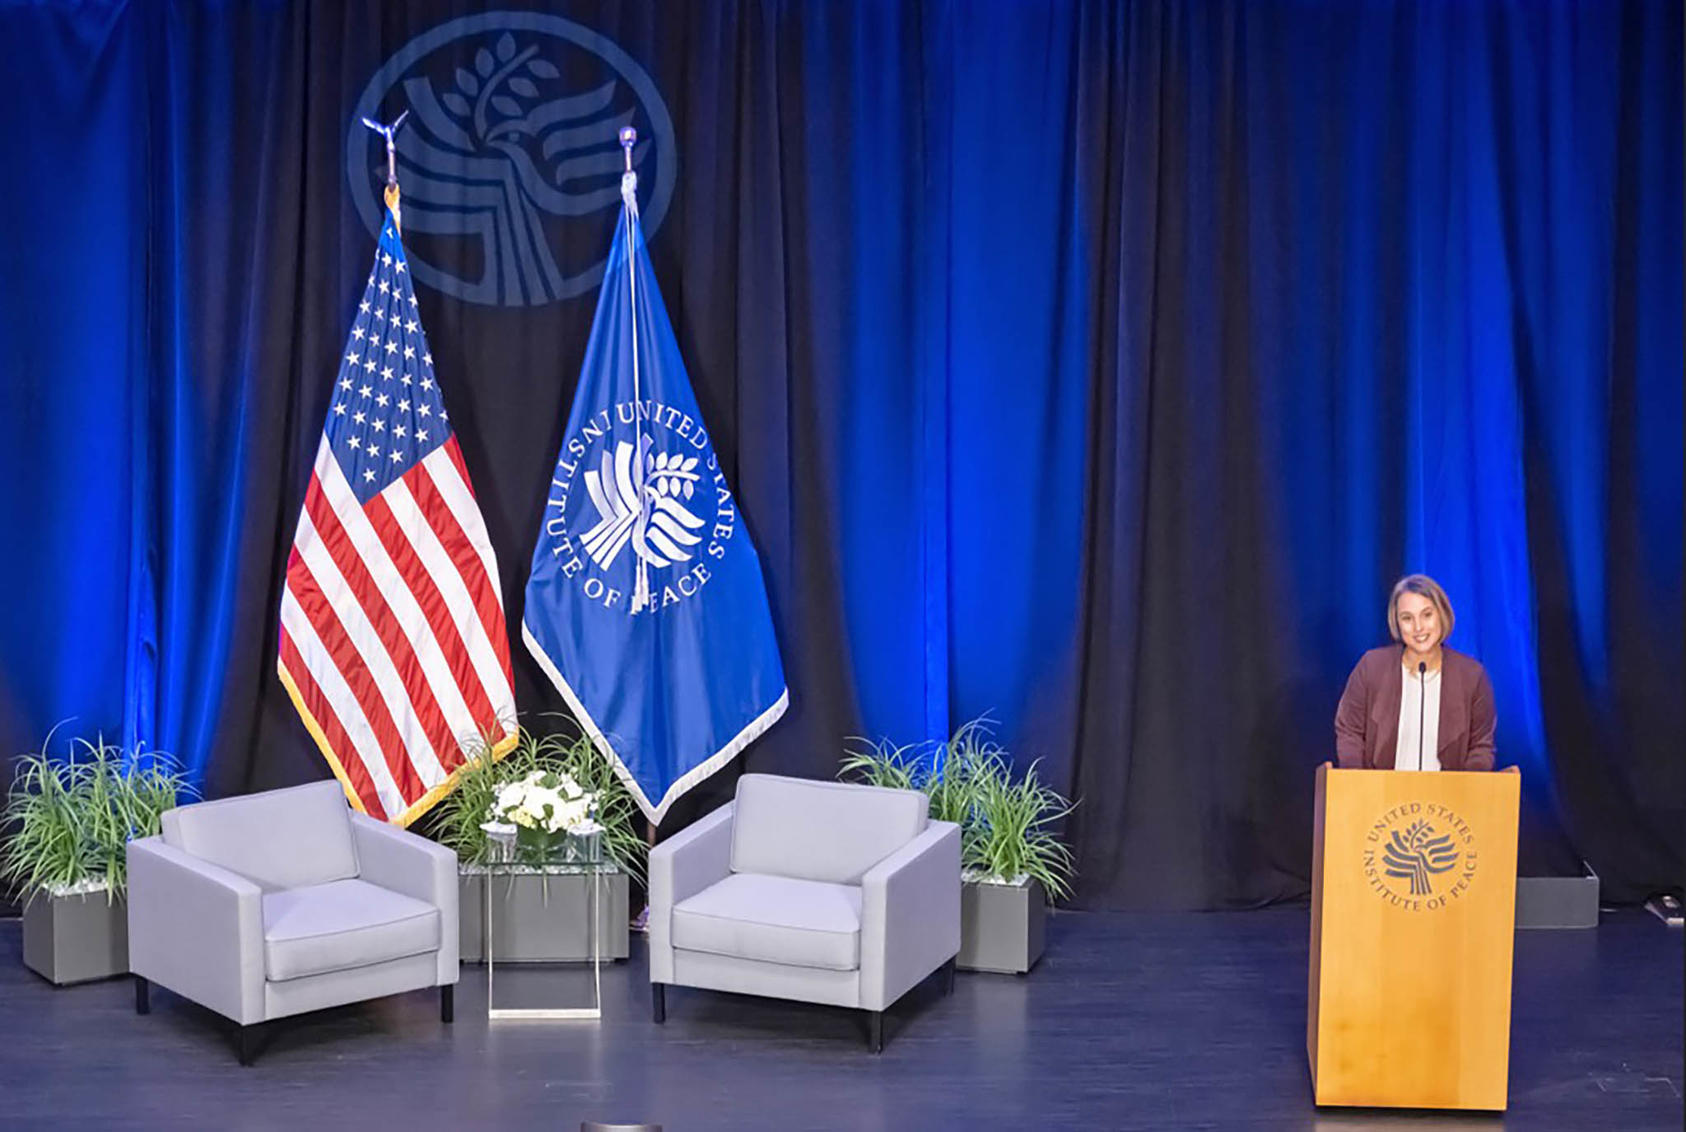 Decatur, Georgia high school history teacher Kristin Embry introduces Senator Raphael Warnock at USIP on November 7 for a discussion of Nelson Mandela’s legacy for peacebuilders in the 2020s. (USIP)